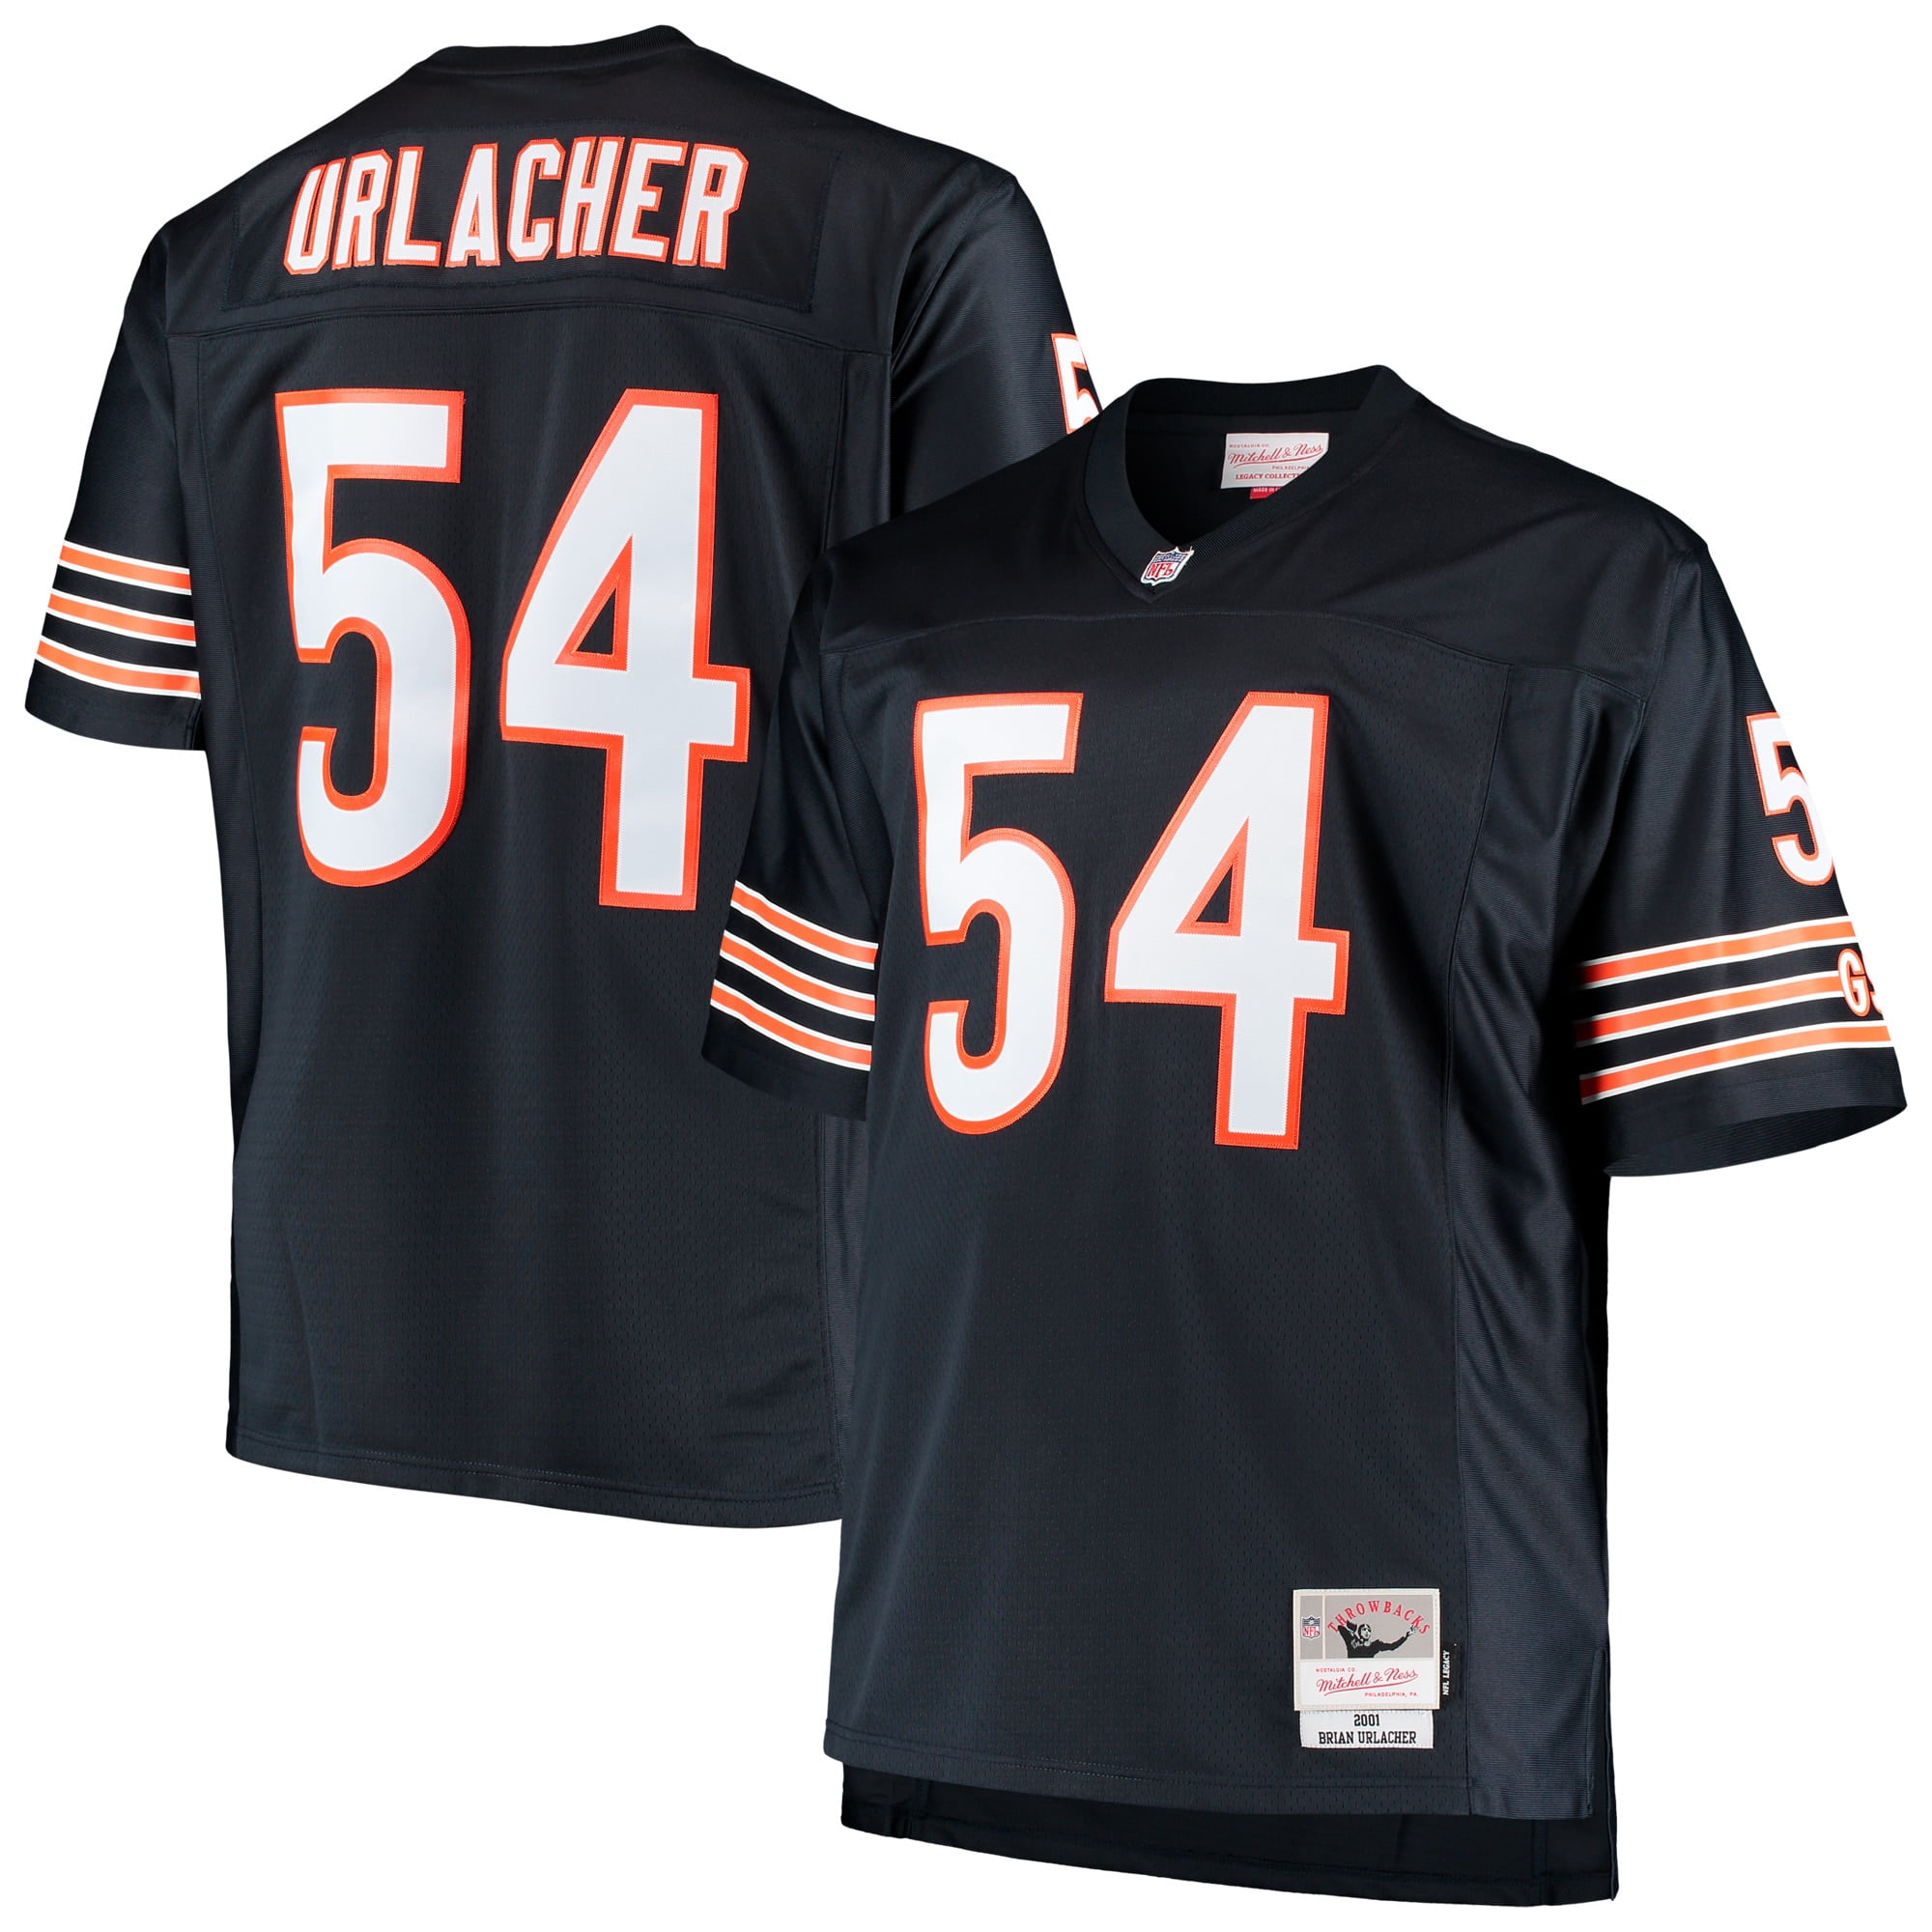 54#   Men’s Jersey Chicago Bears Football Stitched Jersey 